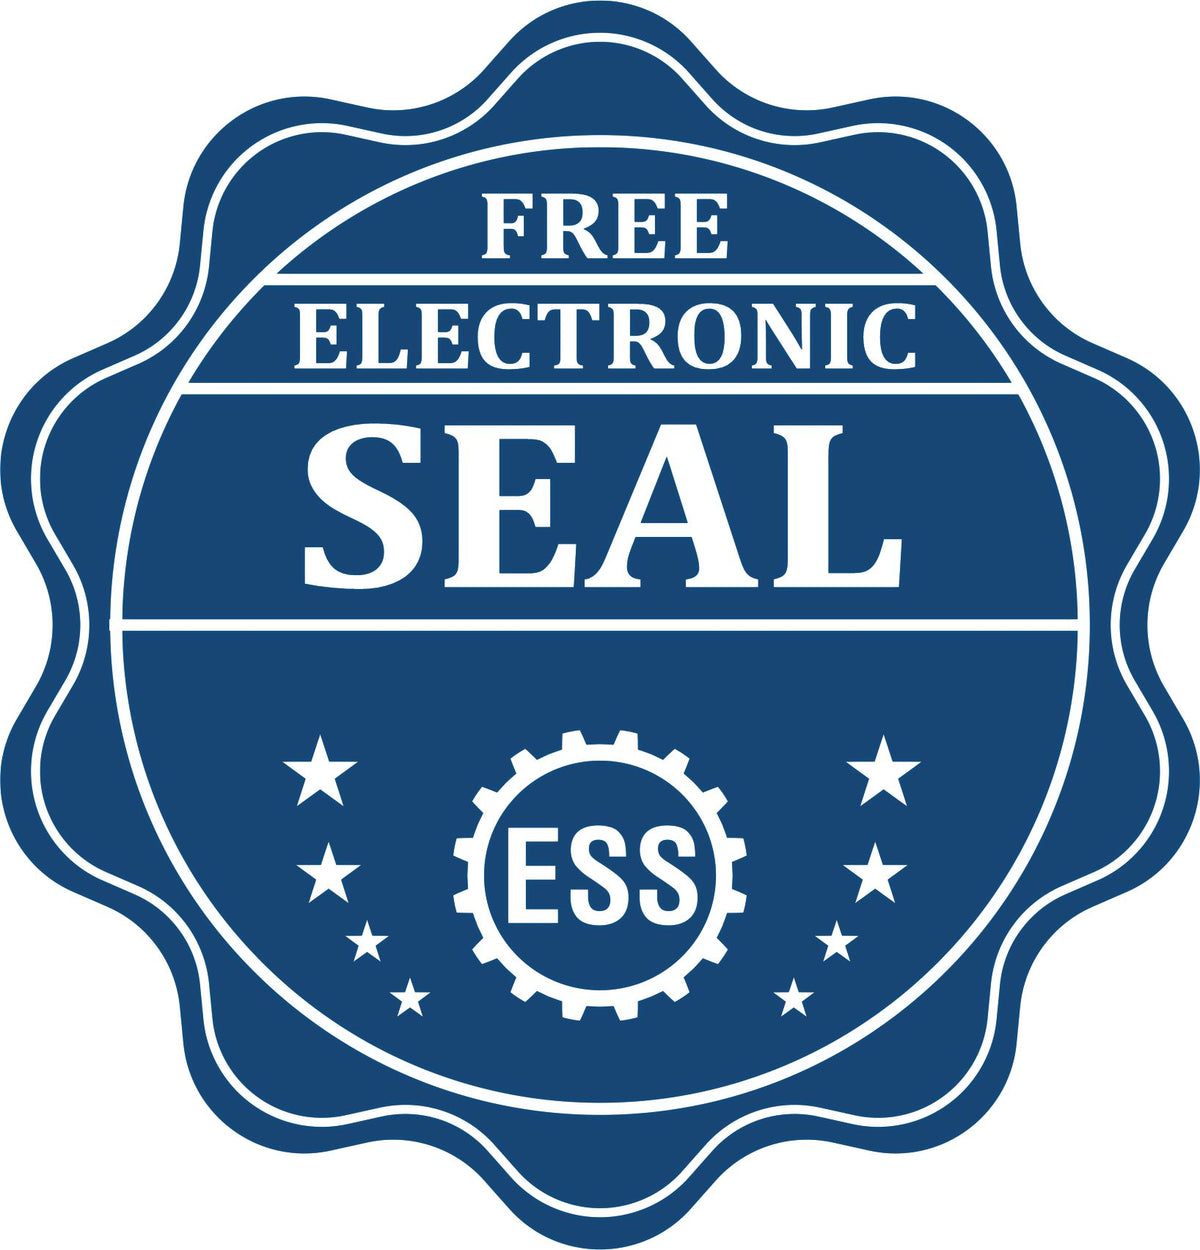 A badge showing a free electronic seal for the Premium MaxLight Pre-Inked Tennessee Geology Stamp with stars and the ESS gear on the emblem.